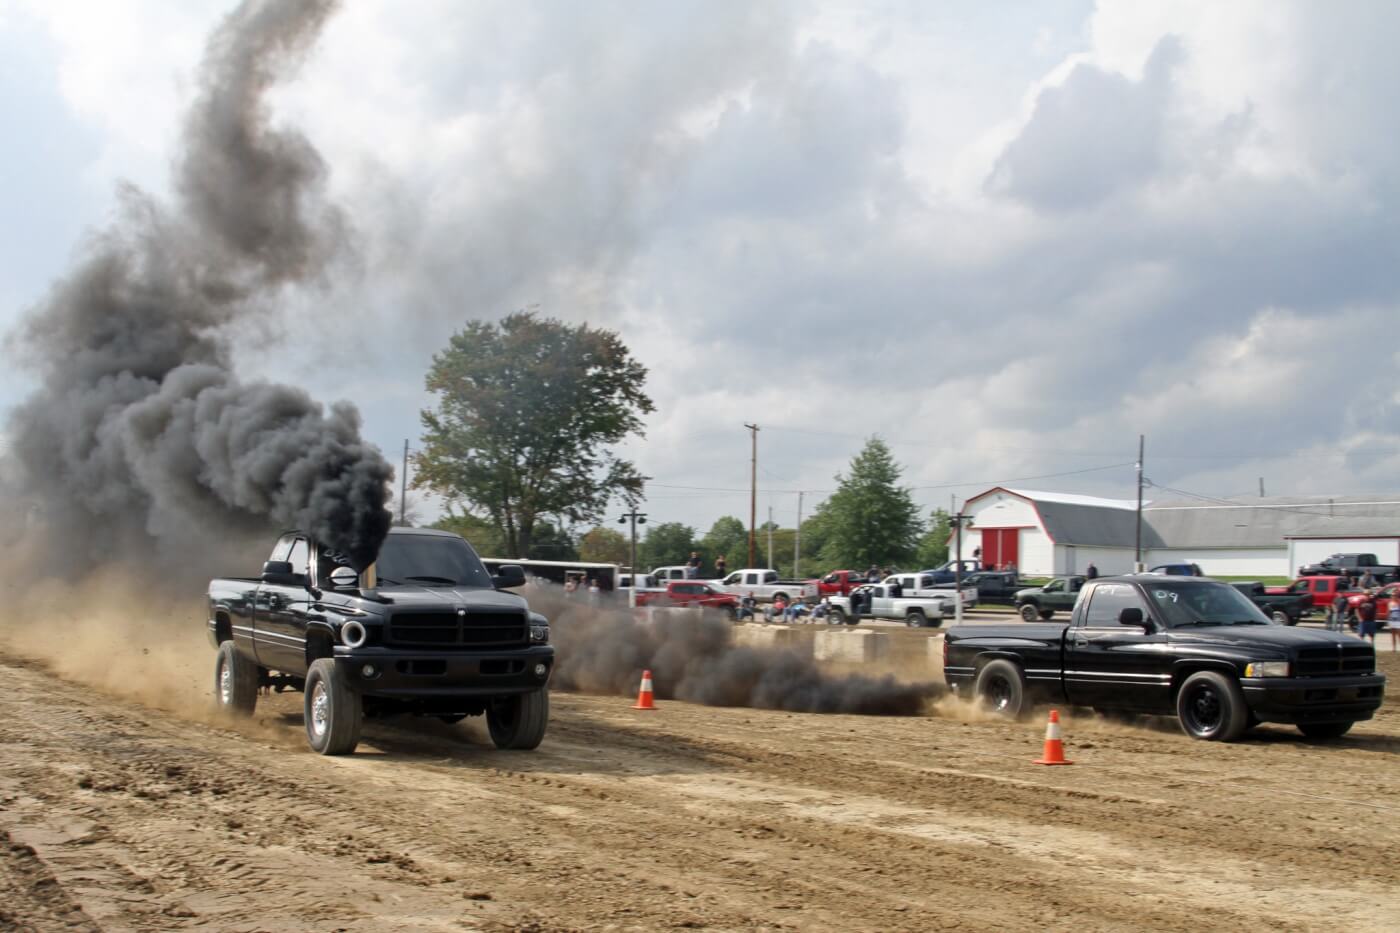 Michael Cordova’s Cummins-powered 1998 Dodge Ram 1500 2WD truck (far lane) blasted down the track taking win after win all the way through the finals in the 2WD/Manual Transmission Diesel class.